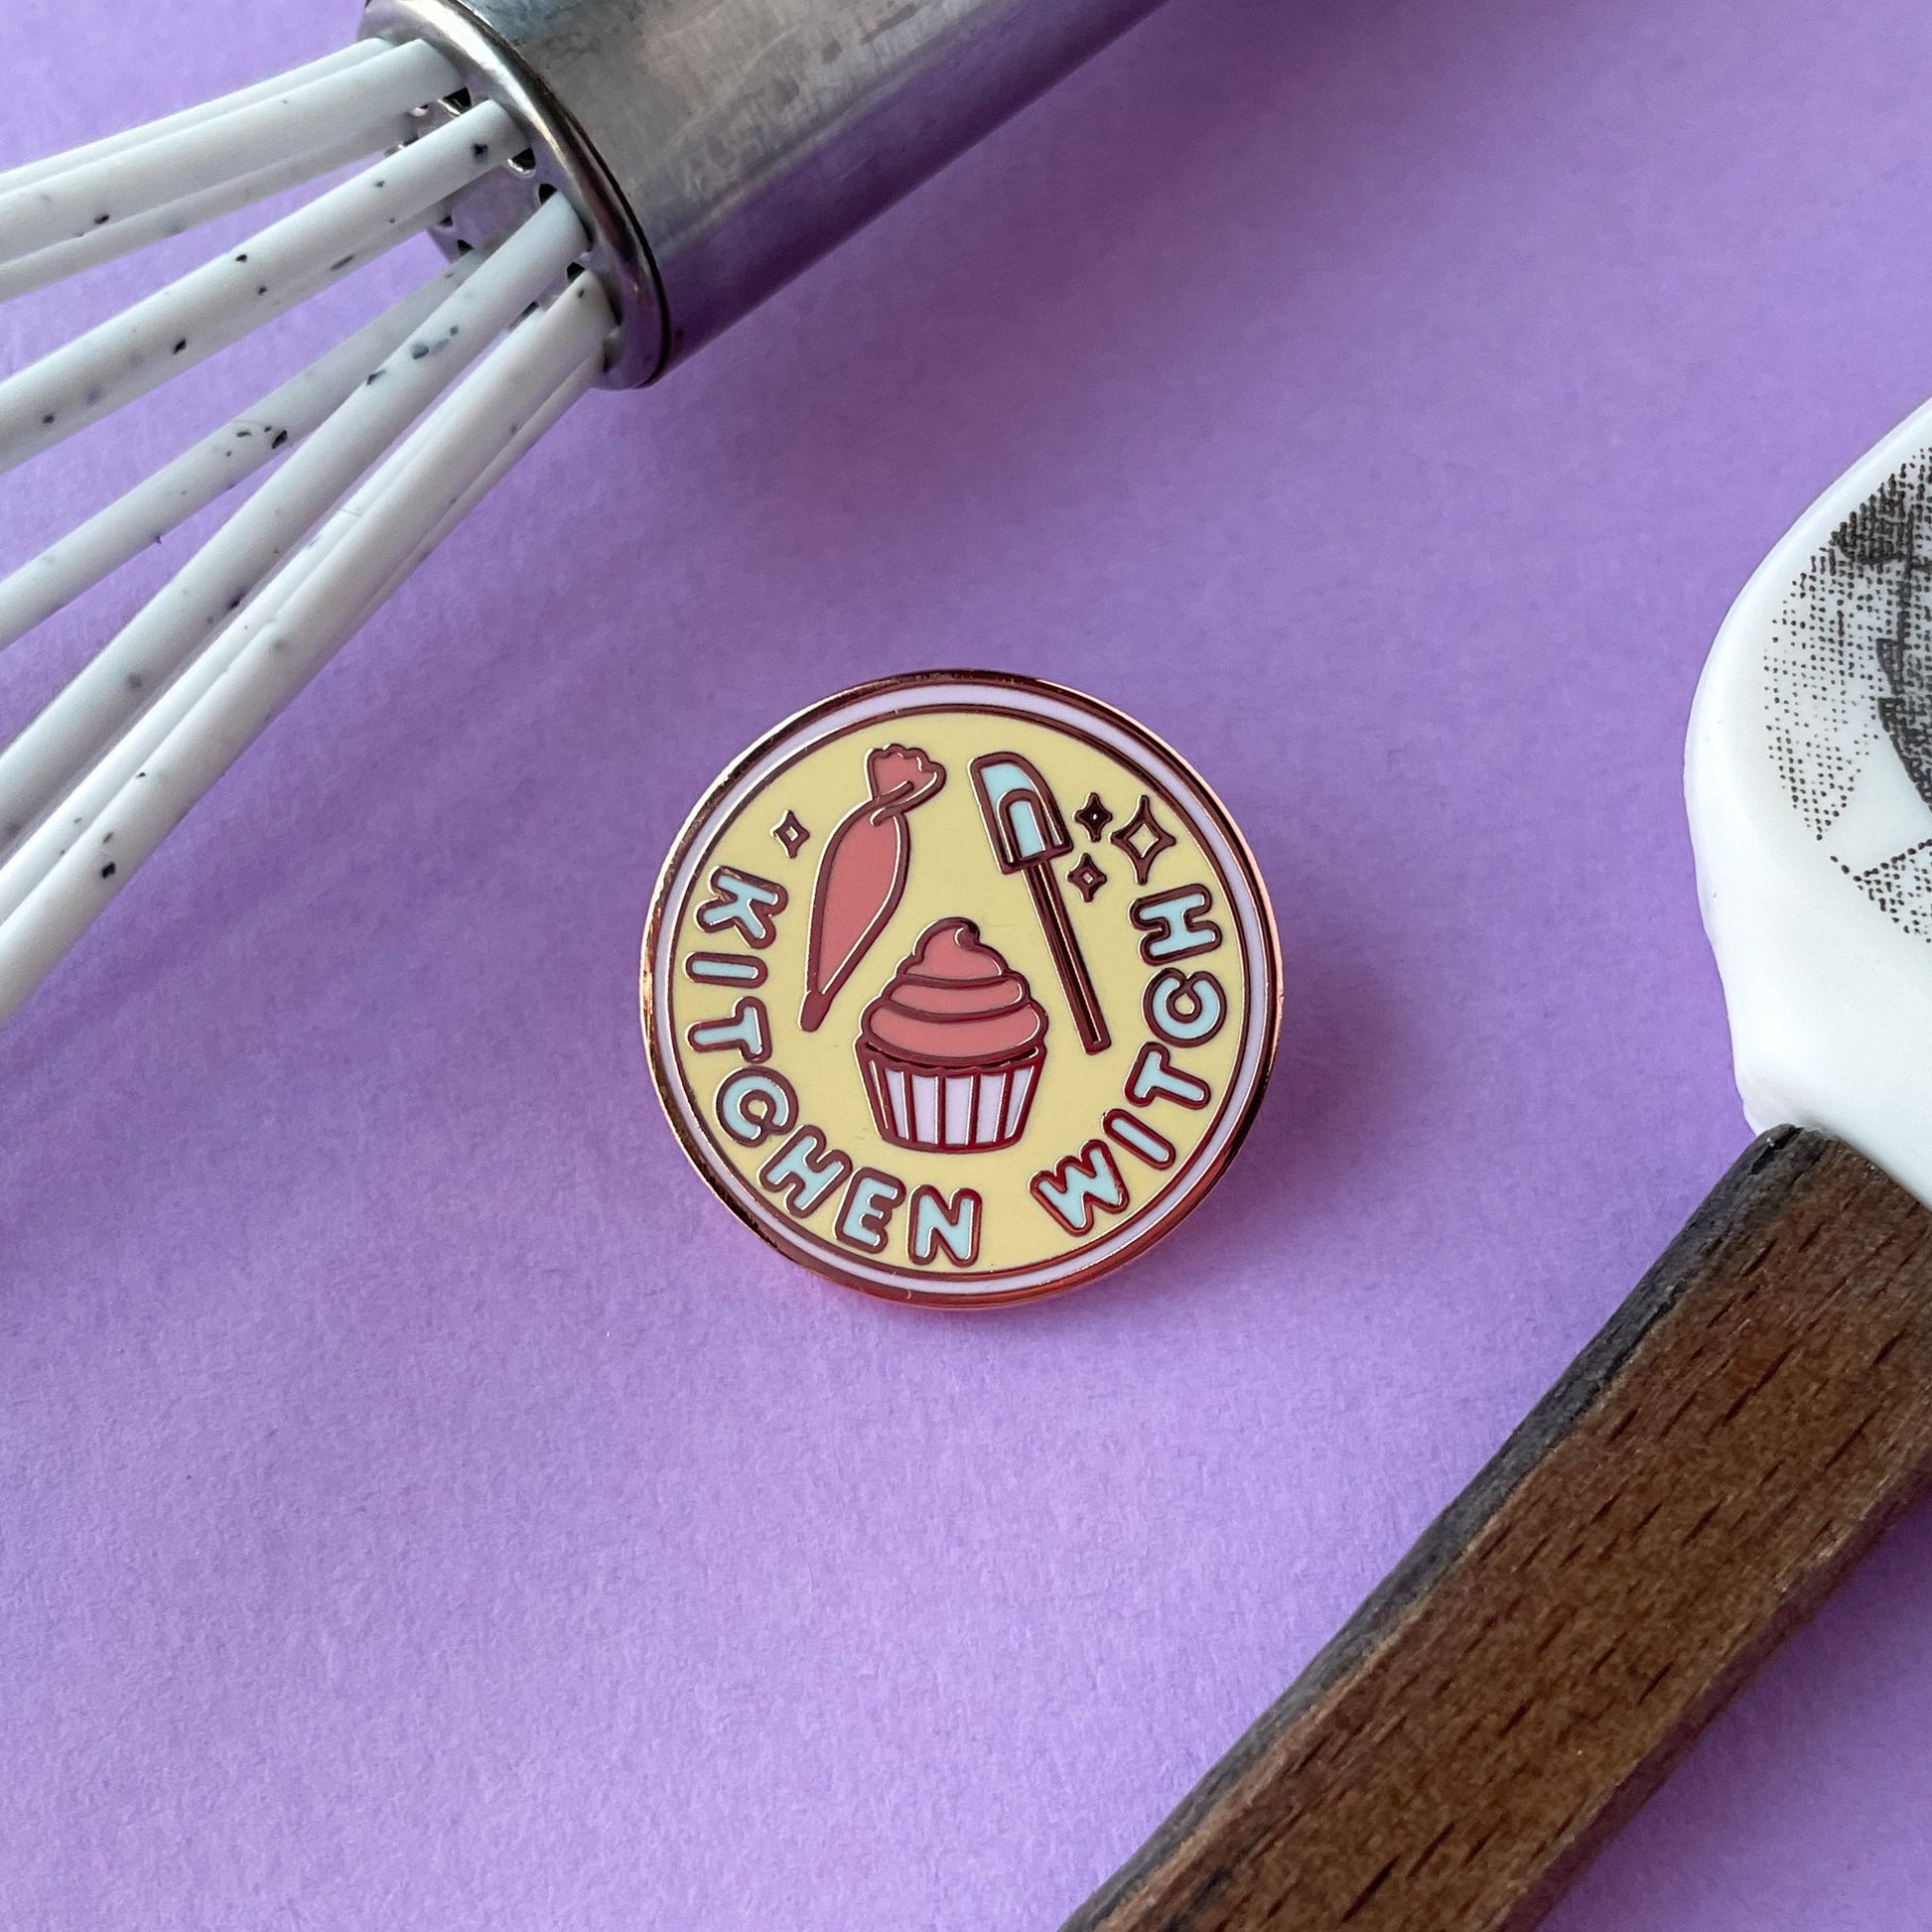 A circular enamel pin on a purple background surrounded by a whisk and spatula handle. The pin has the words "Kitchen Witch" on it. 